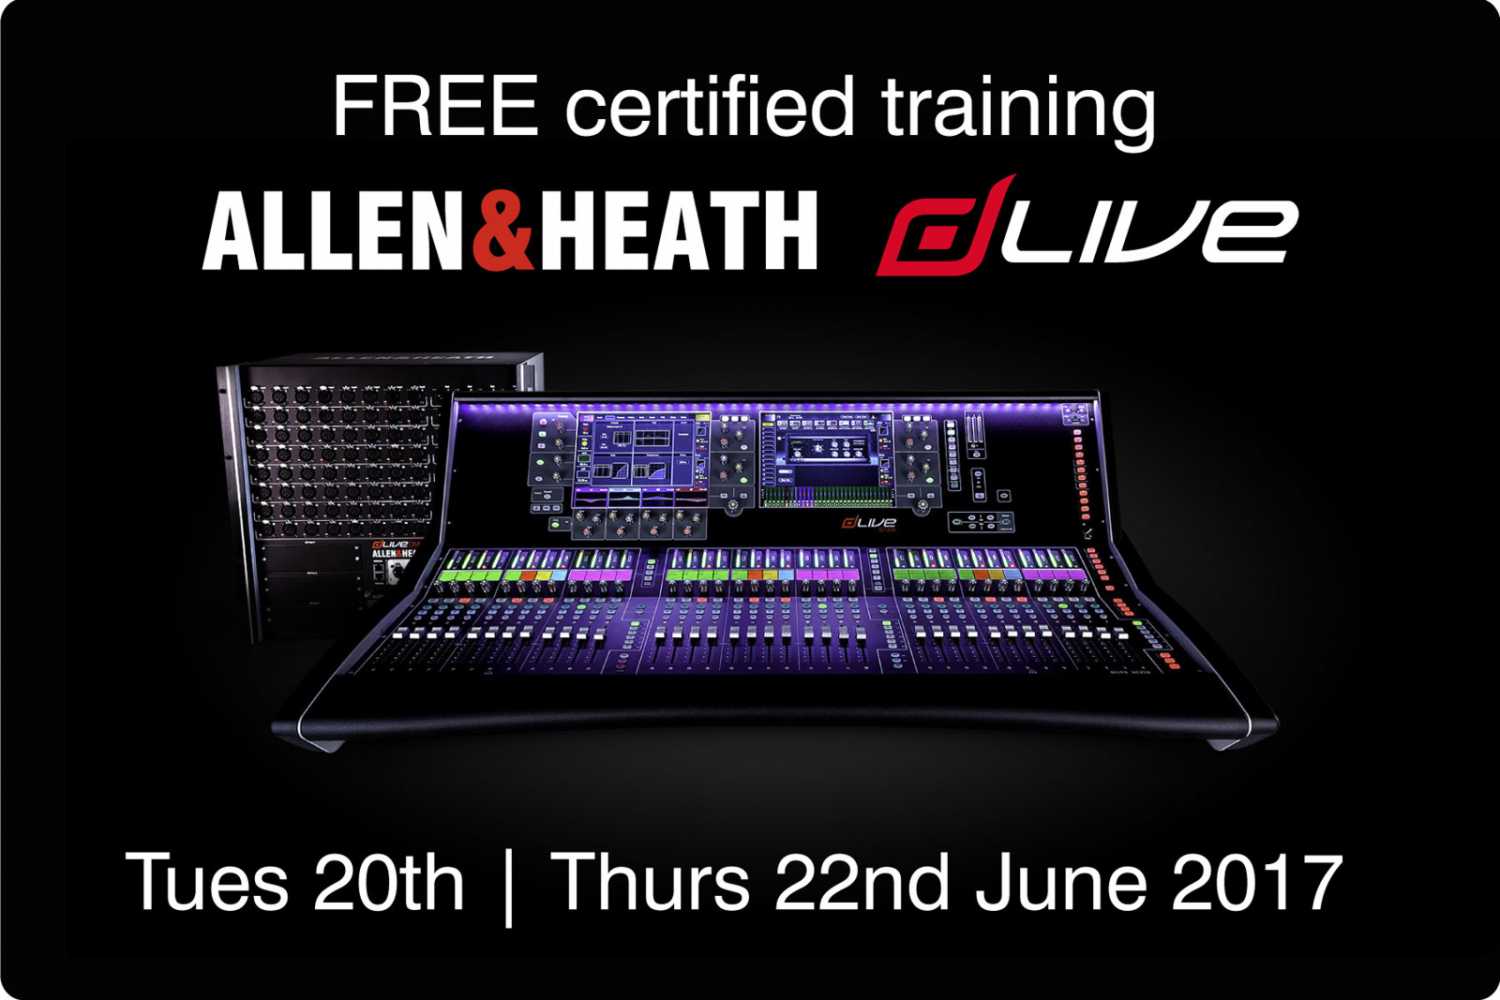 The all-day course is designed specifically for existing dLive users, touring engineers and those looking to upgrade to dLive